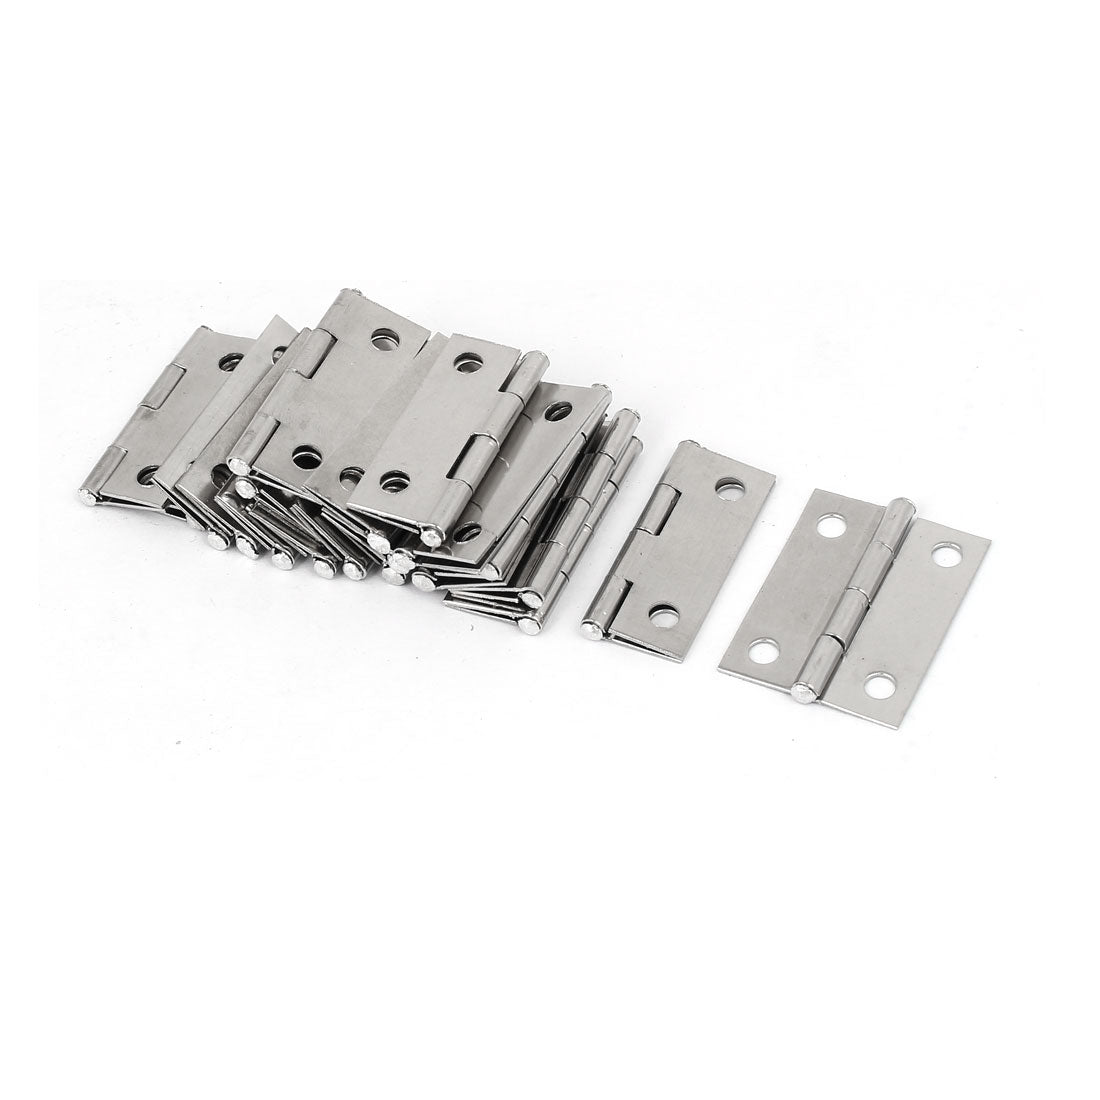 uxcell Uxcell Household Cabinet Cupboard Hardware Stainless Steel Door Hinge 38mm Long 20pcs